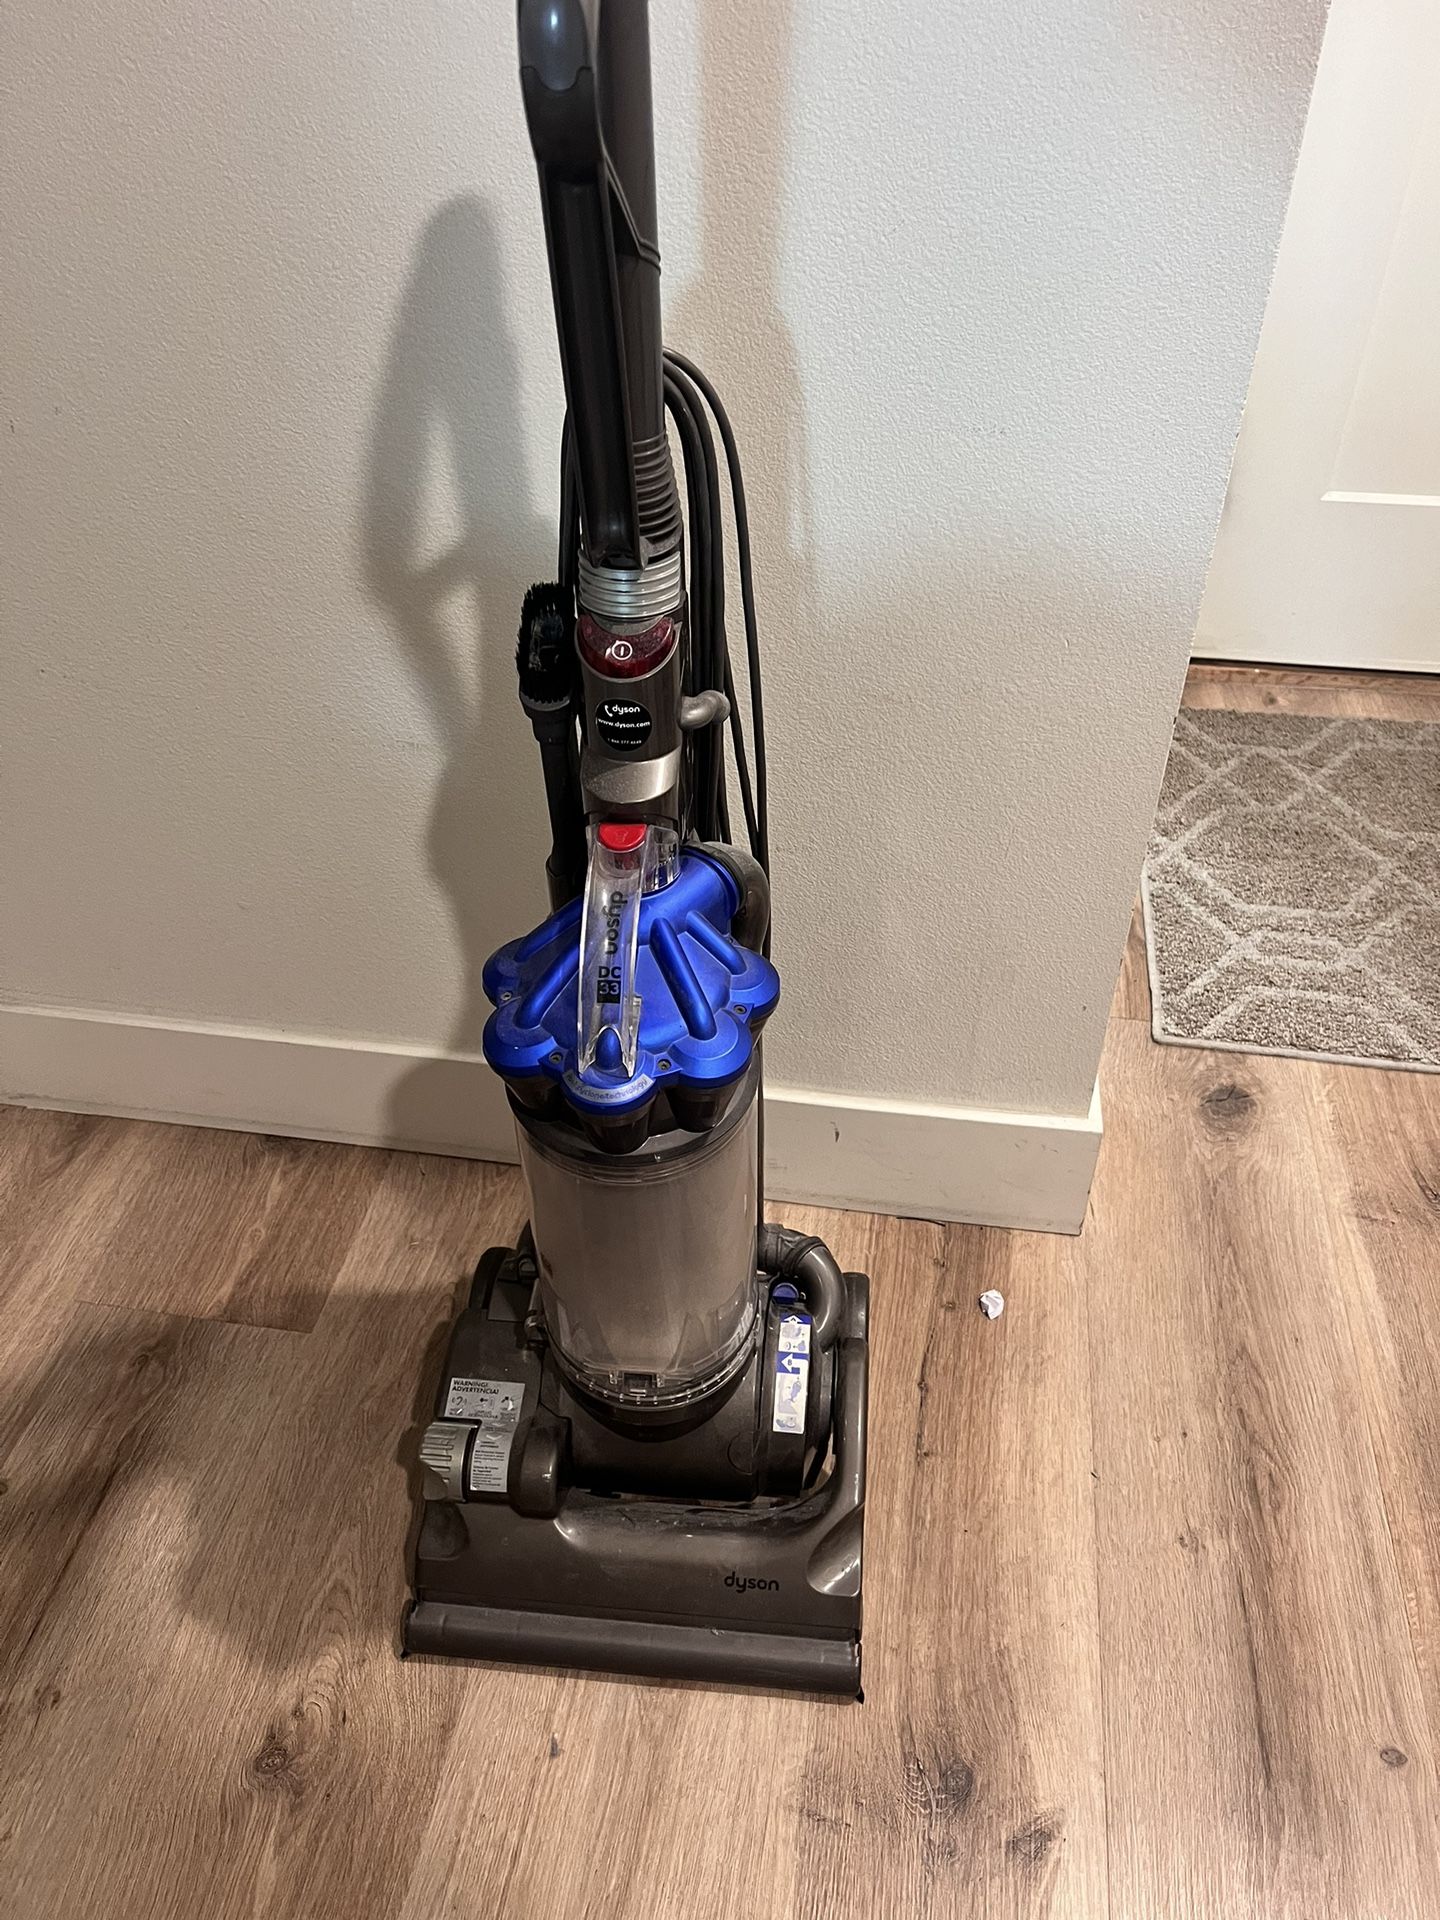 Dyson Dc33 Vacuum Good Condition Works Perfect 